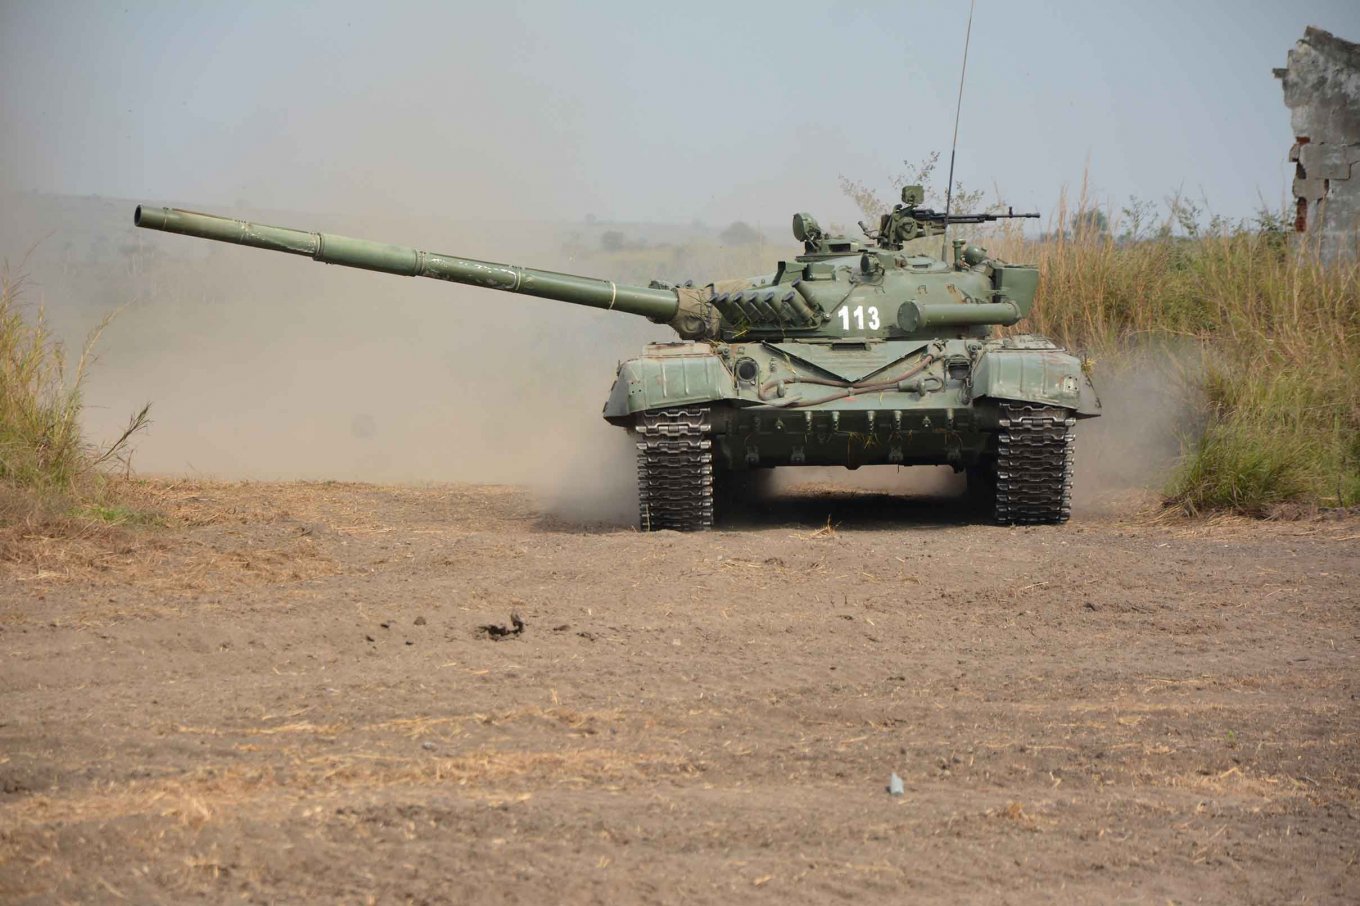 T-72 tank of the armed forces of Angola, Angola Wants to Be the US Ally, Its Excess Soviet Weapons Can Help the Armed Forces of Ukraine, Defense Express